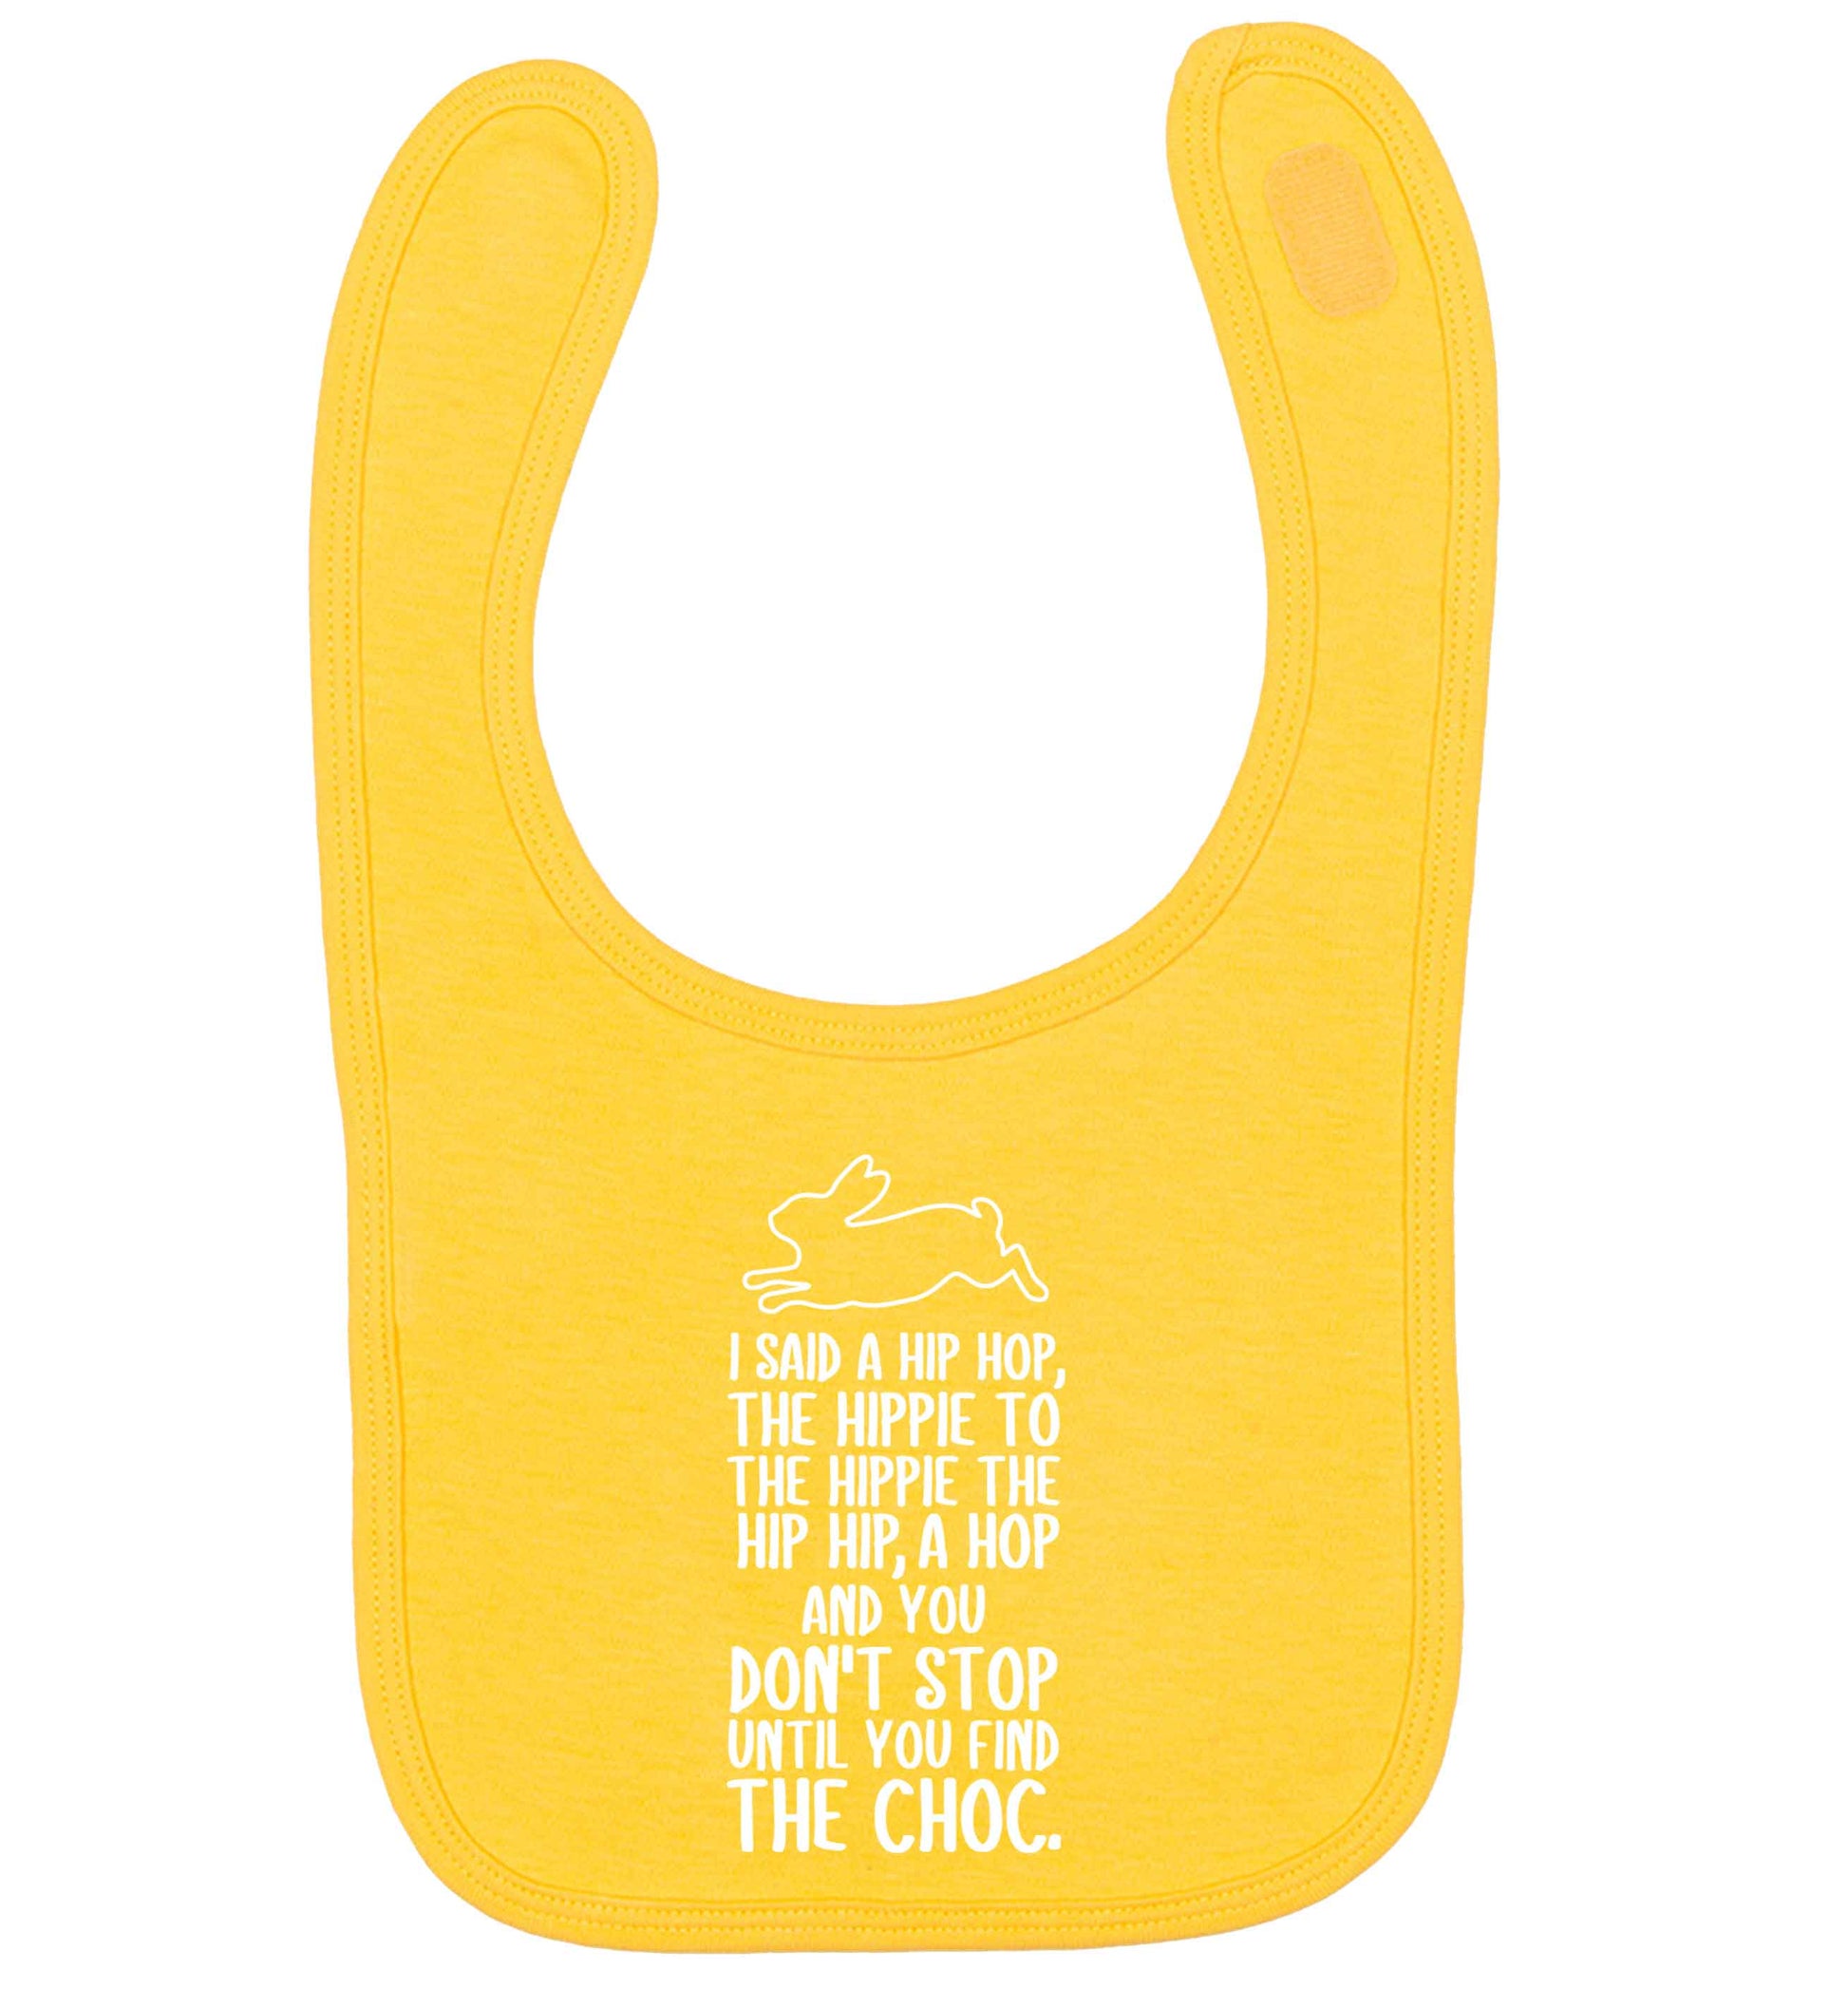 Don't stop until you find the choc yellow baby bib